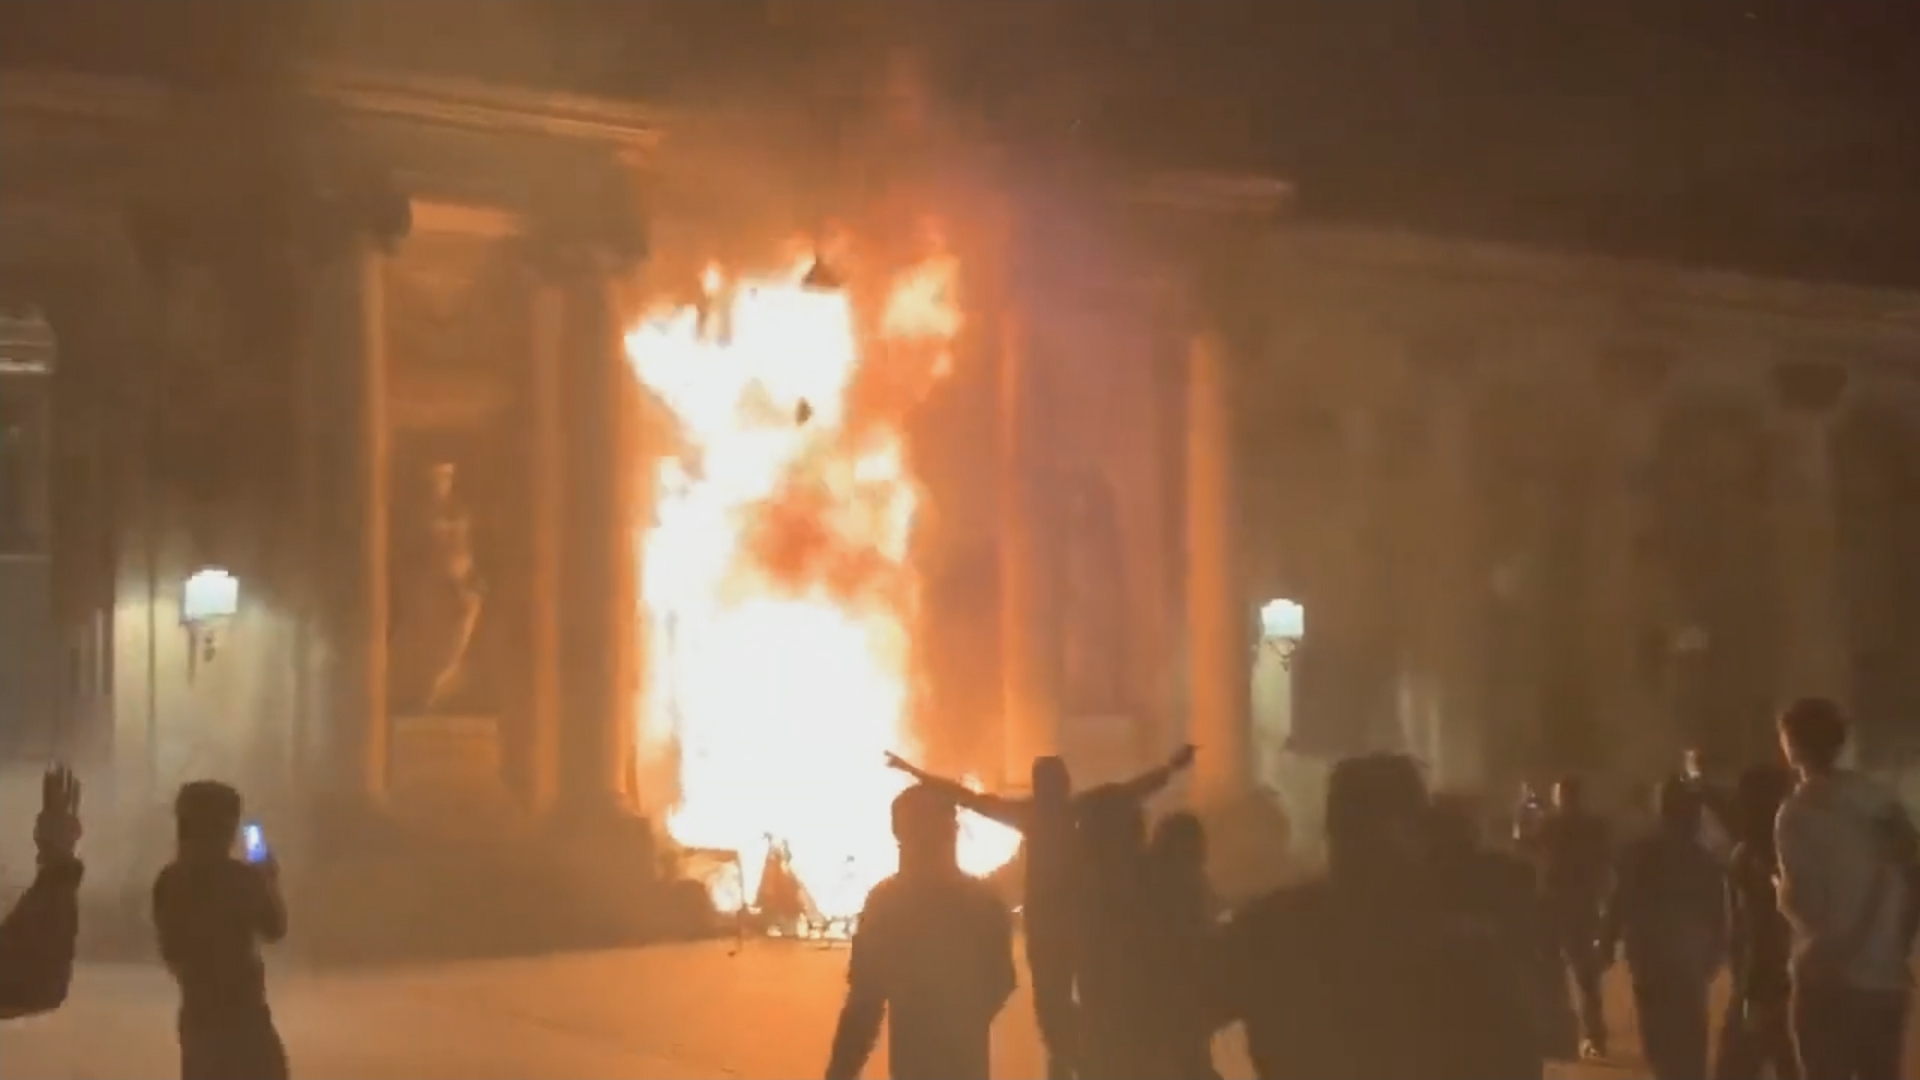 Bordeaux City Hall door set on fire as France rocked by protests | ITV News